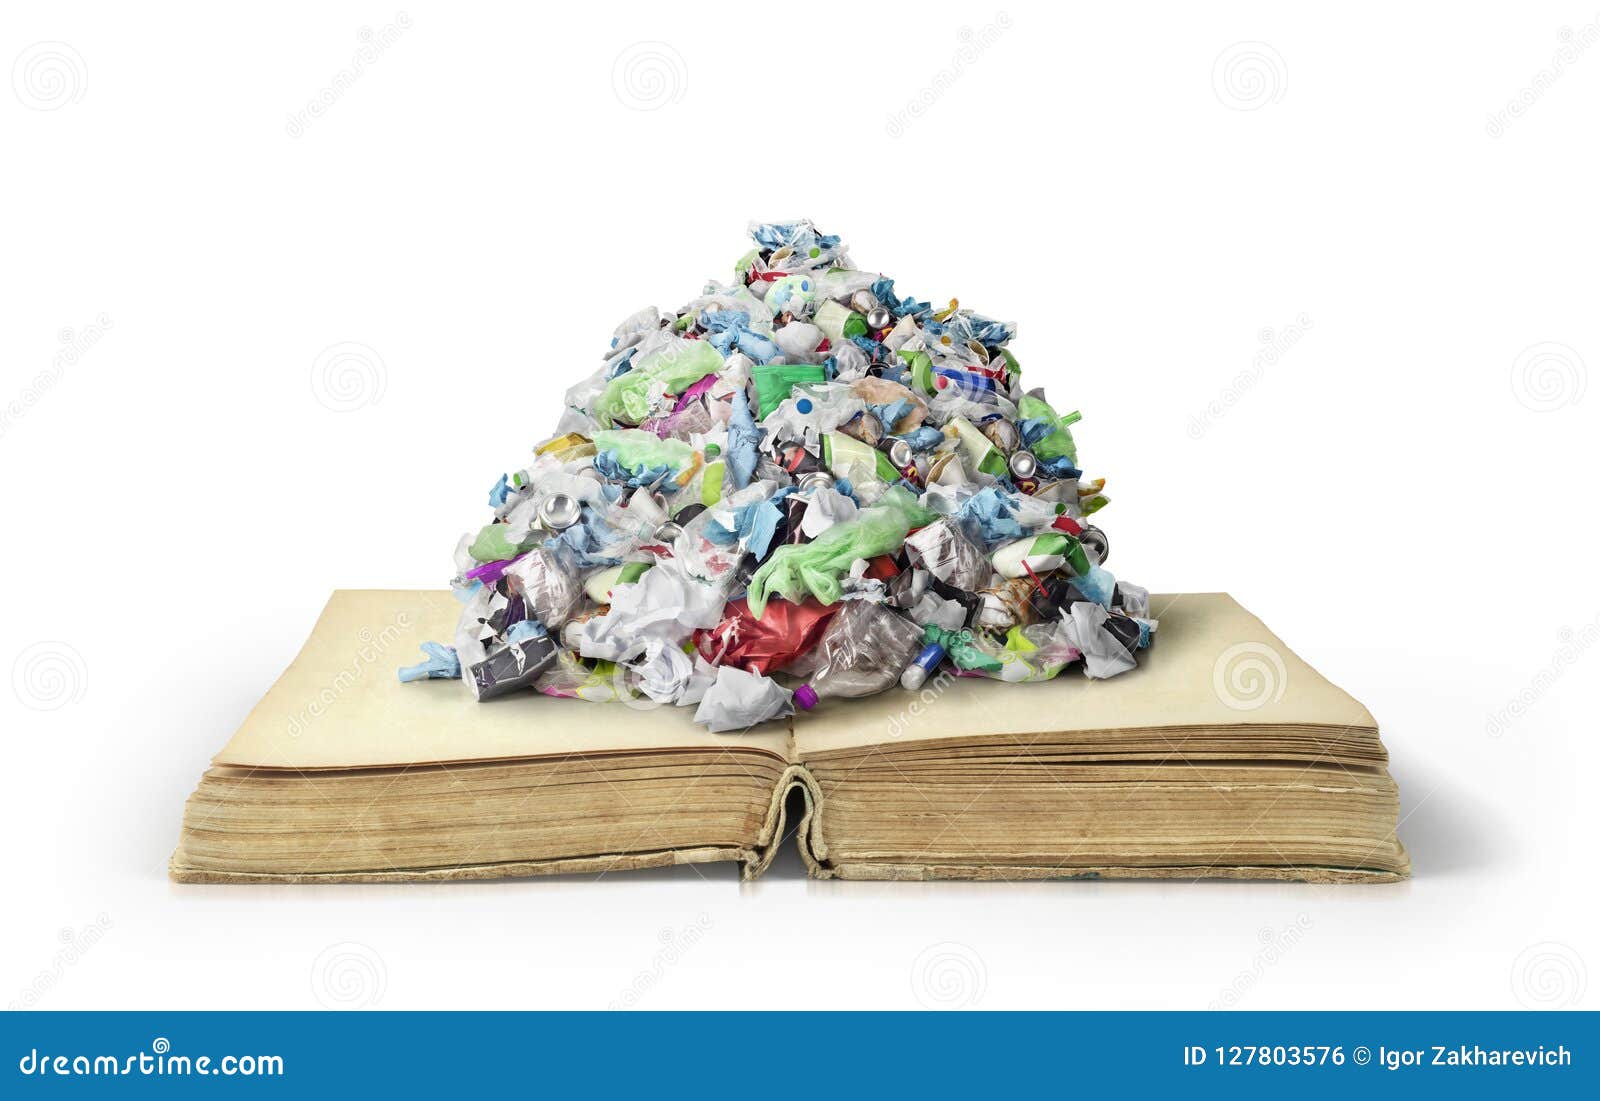 the concept of useless knowledge. garbage pile on open book